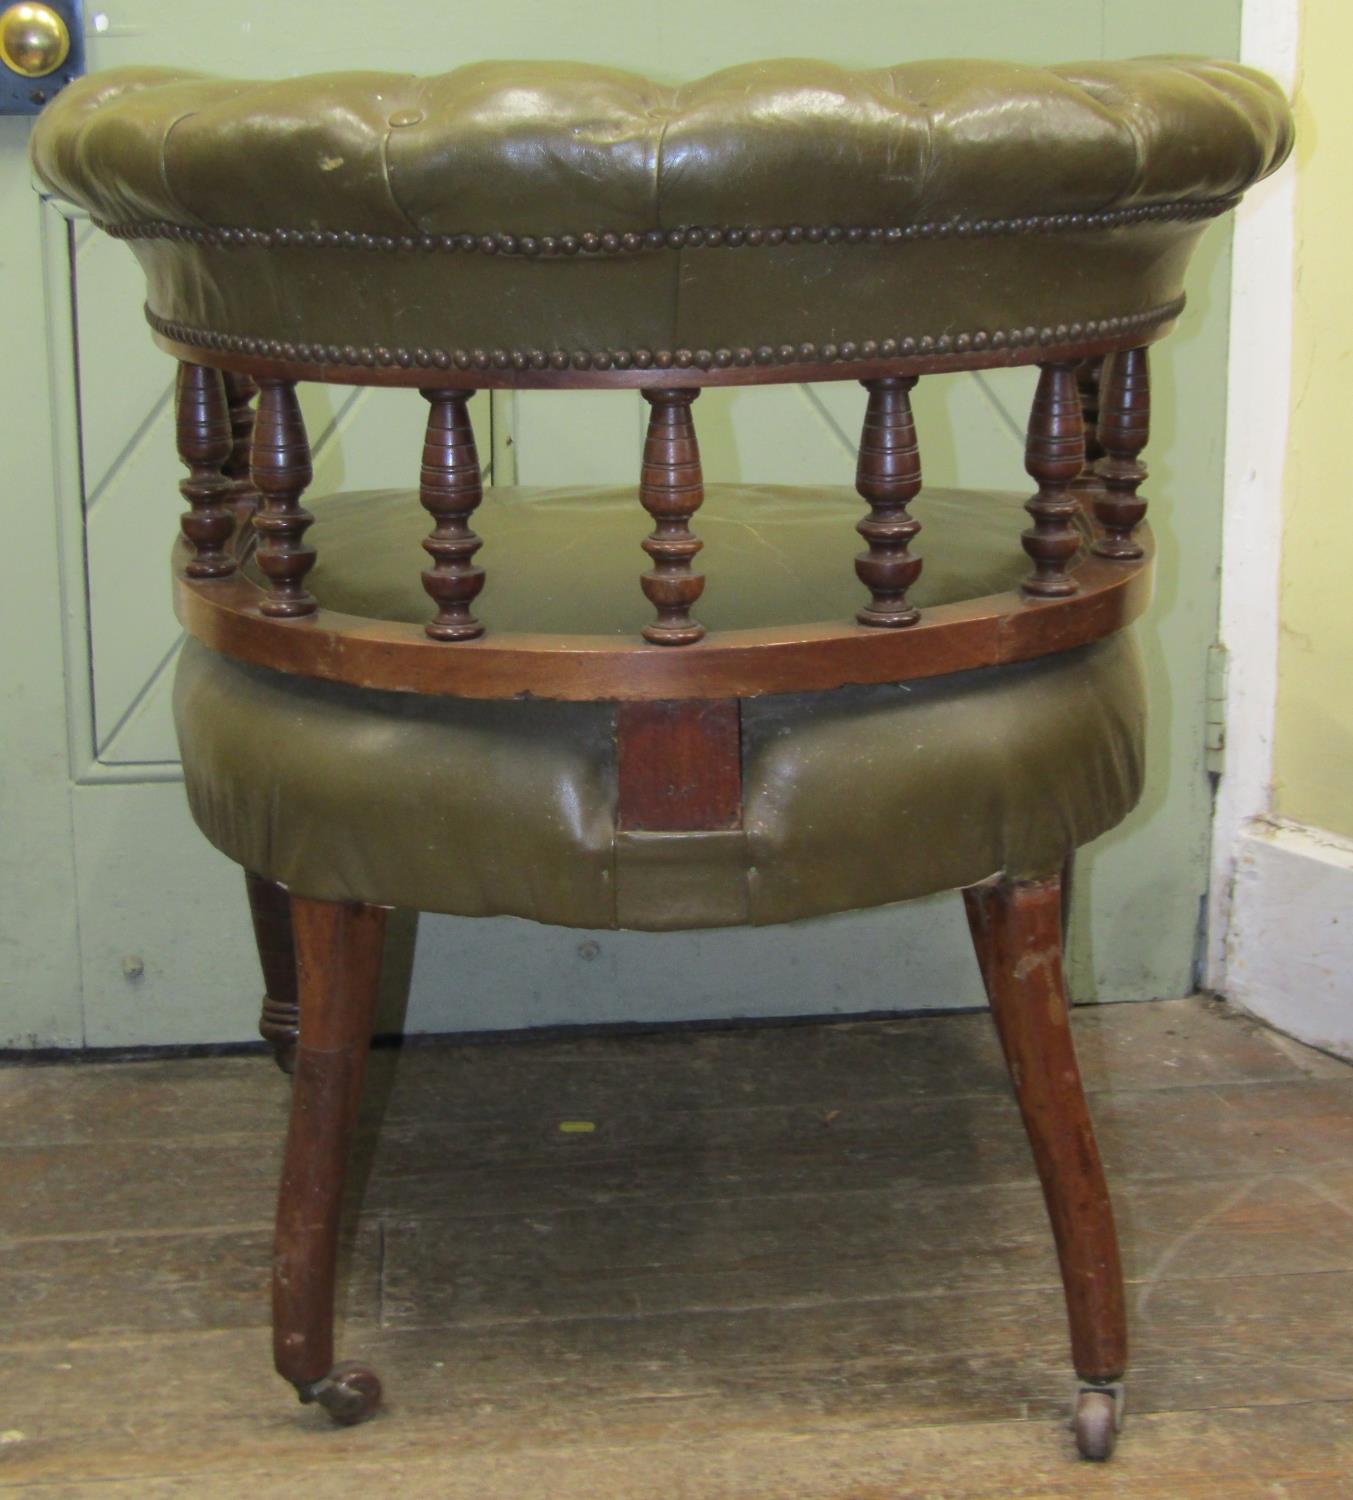 A Victorian mahogany library of office chair, the show wood frame with turned spindle mouldings - Image 3 of 3